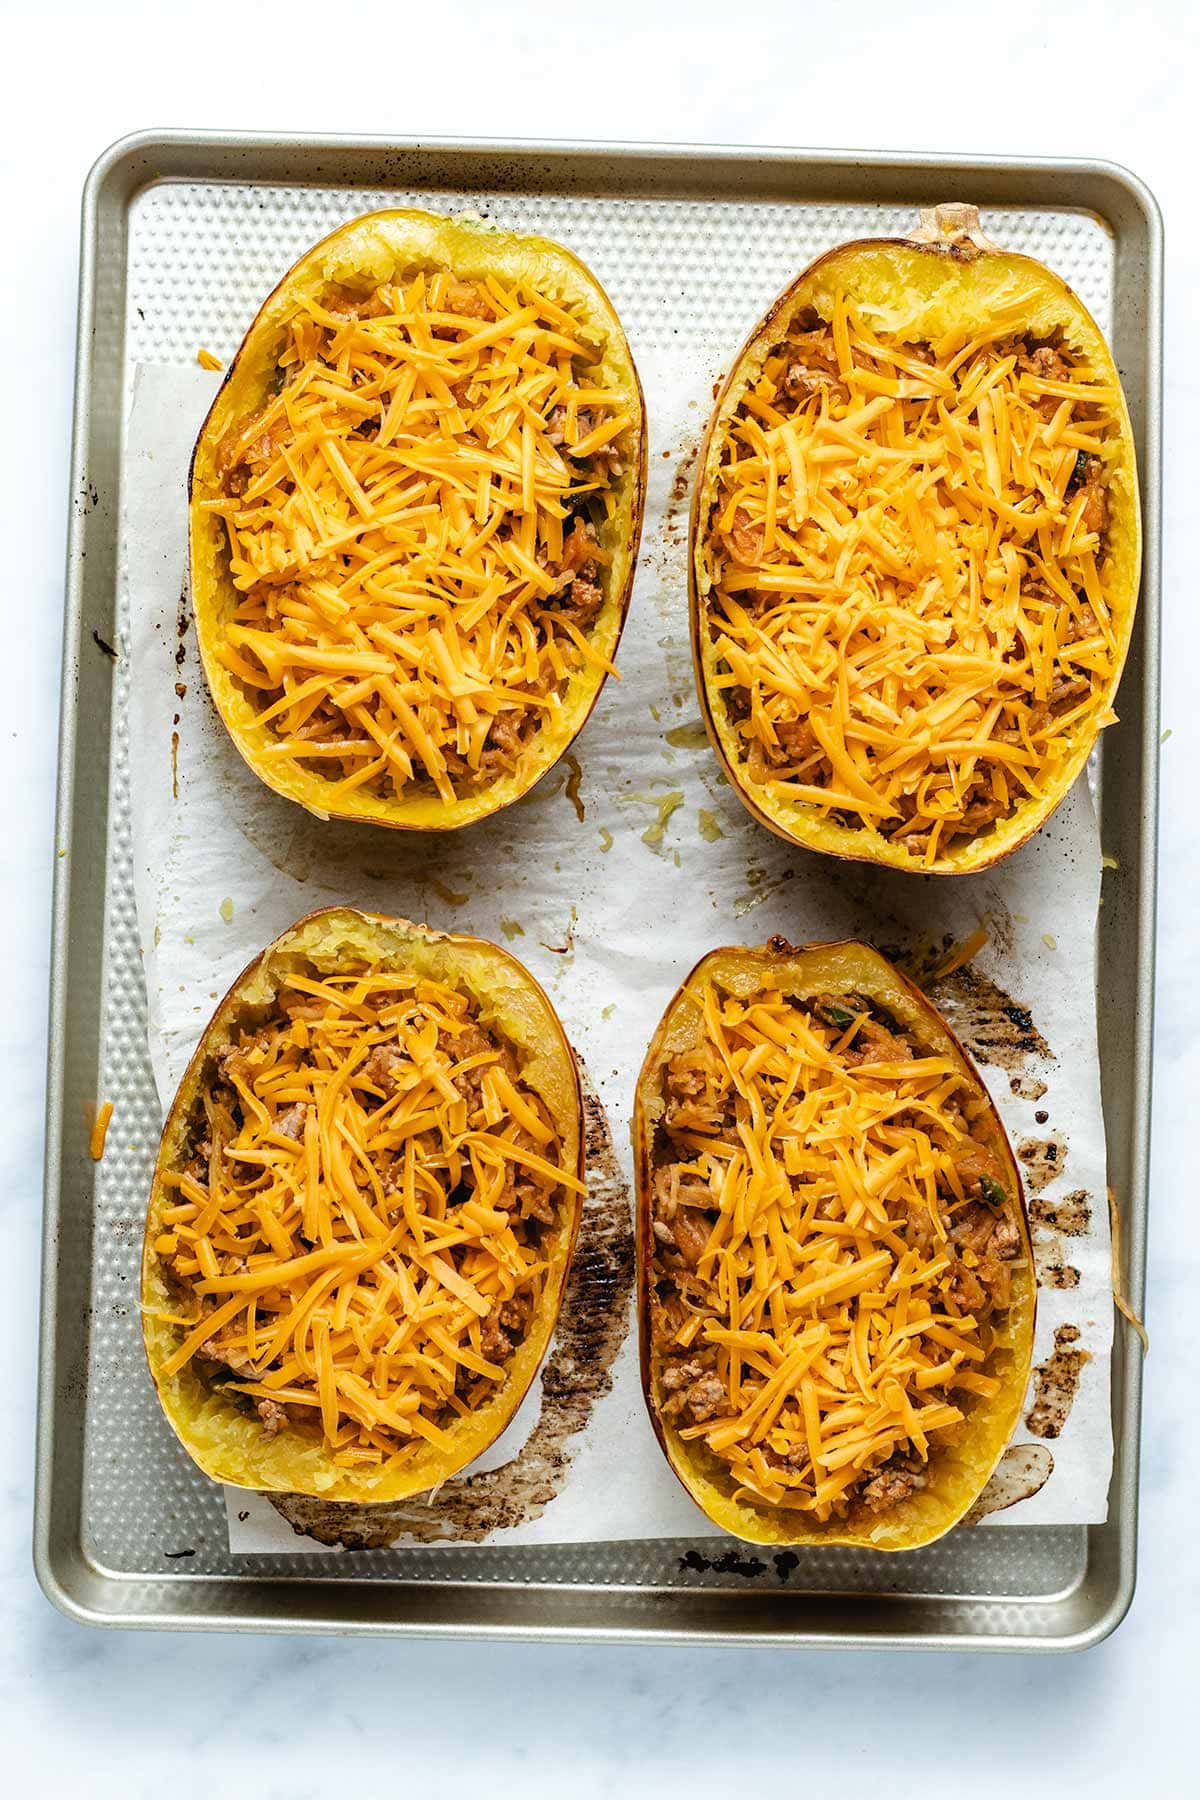 Four taco stuffed spaghetti squash halves on a sheet pan with grated cheese added on top before melting.